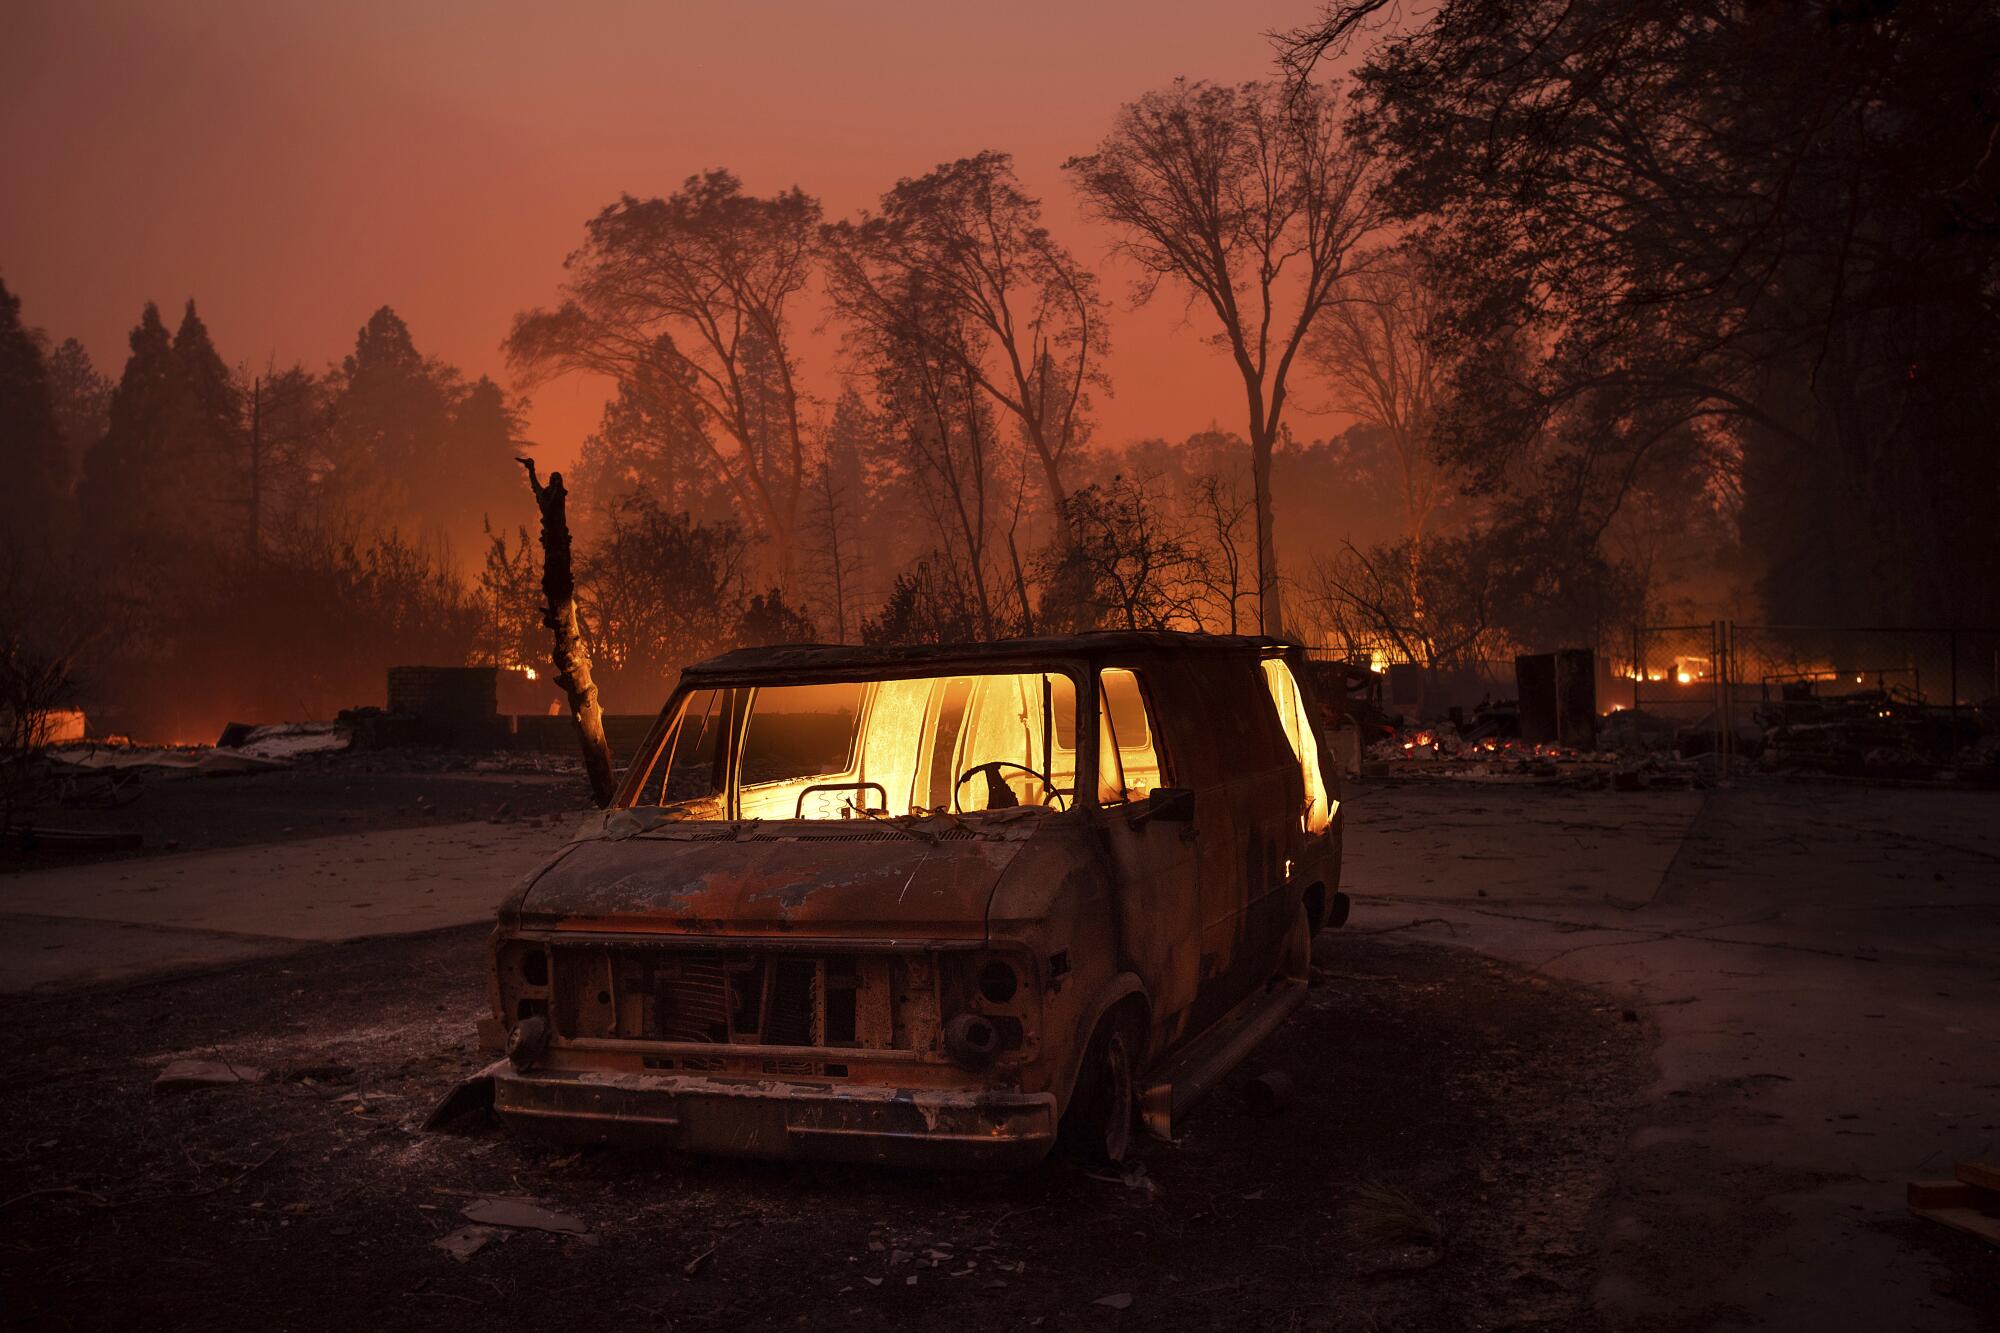 Flames burn inside a van during the Camp fire as trees are in the background and the sky is orange. 